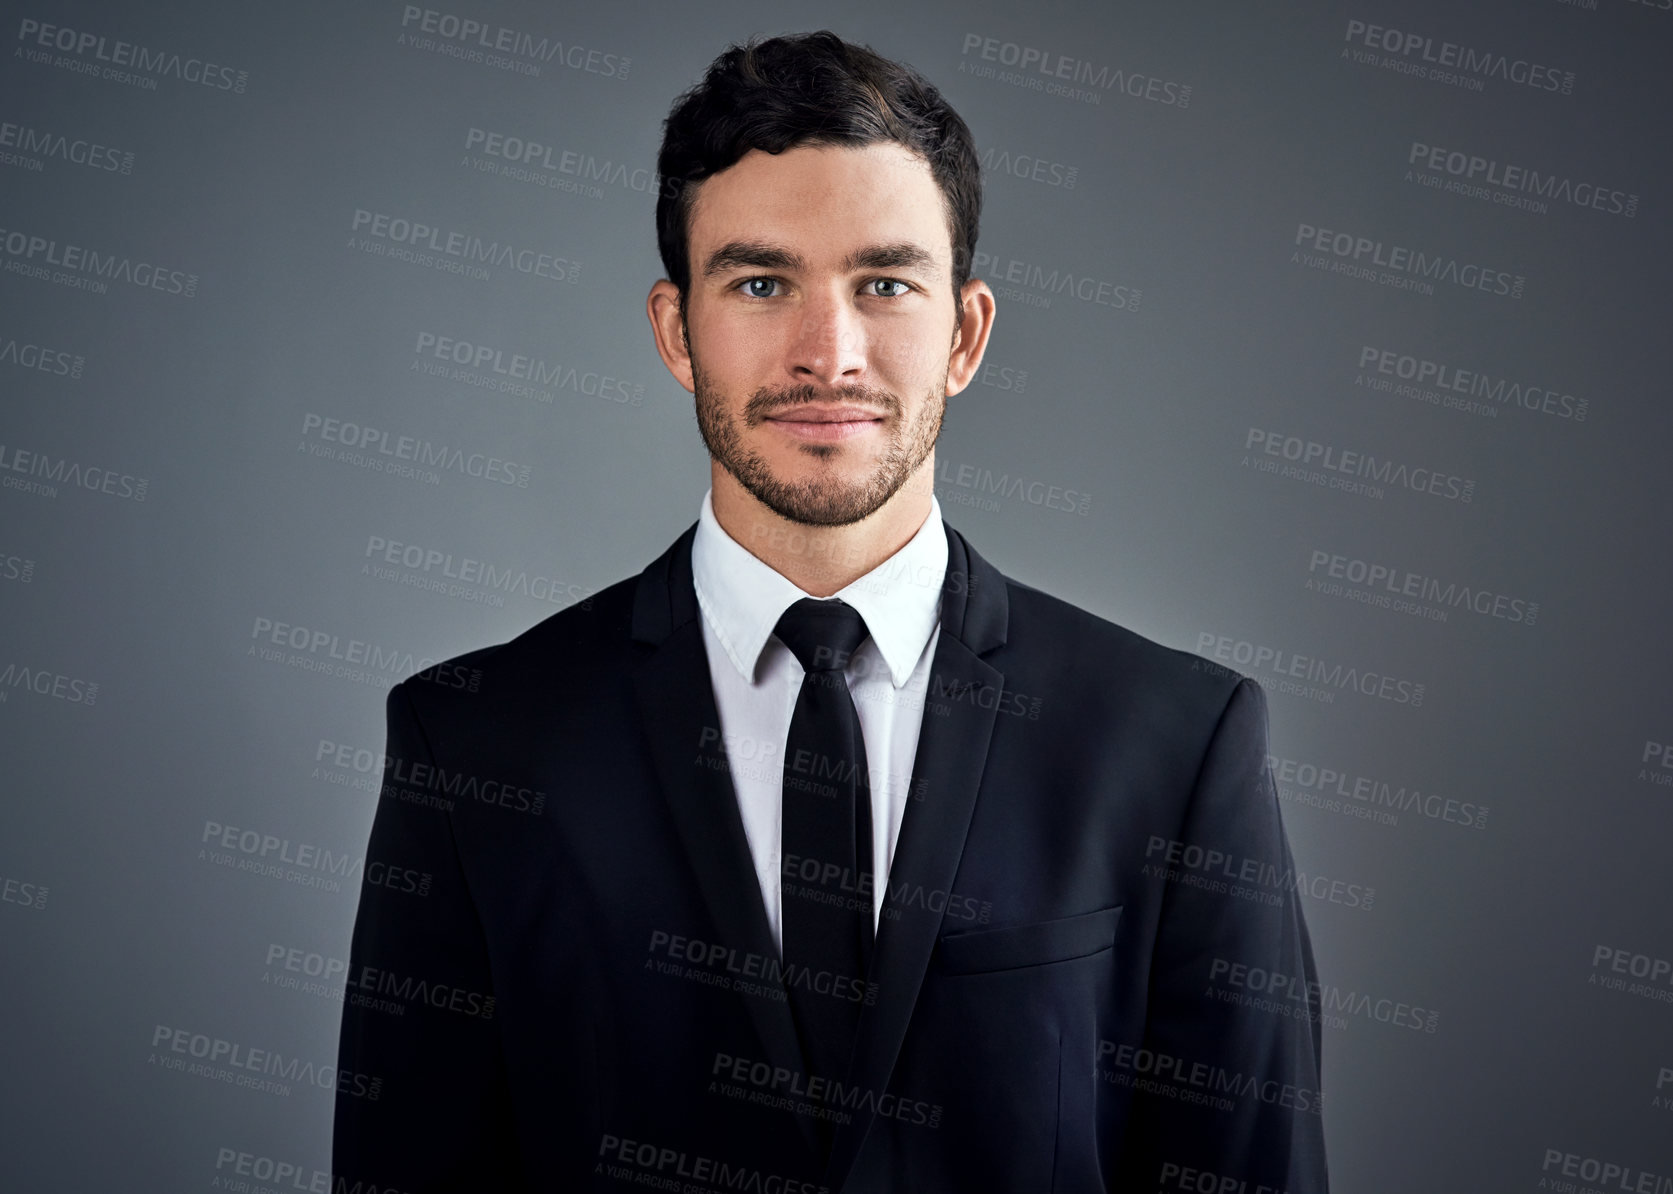 Buy stock photo Studio portrait of a handsome young businessman dressed in a suit against a grey background